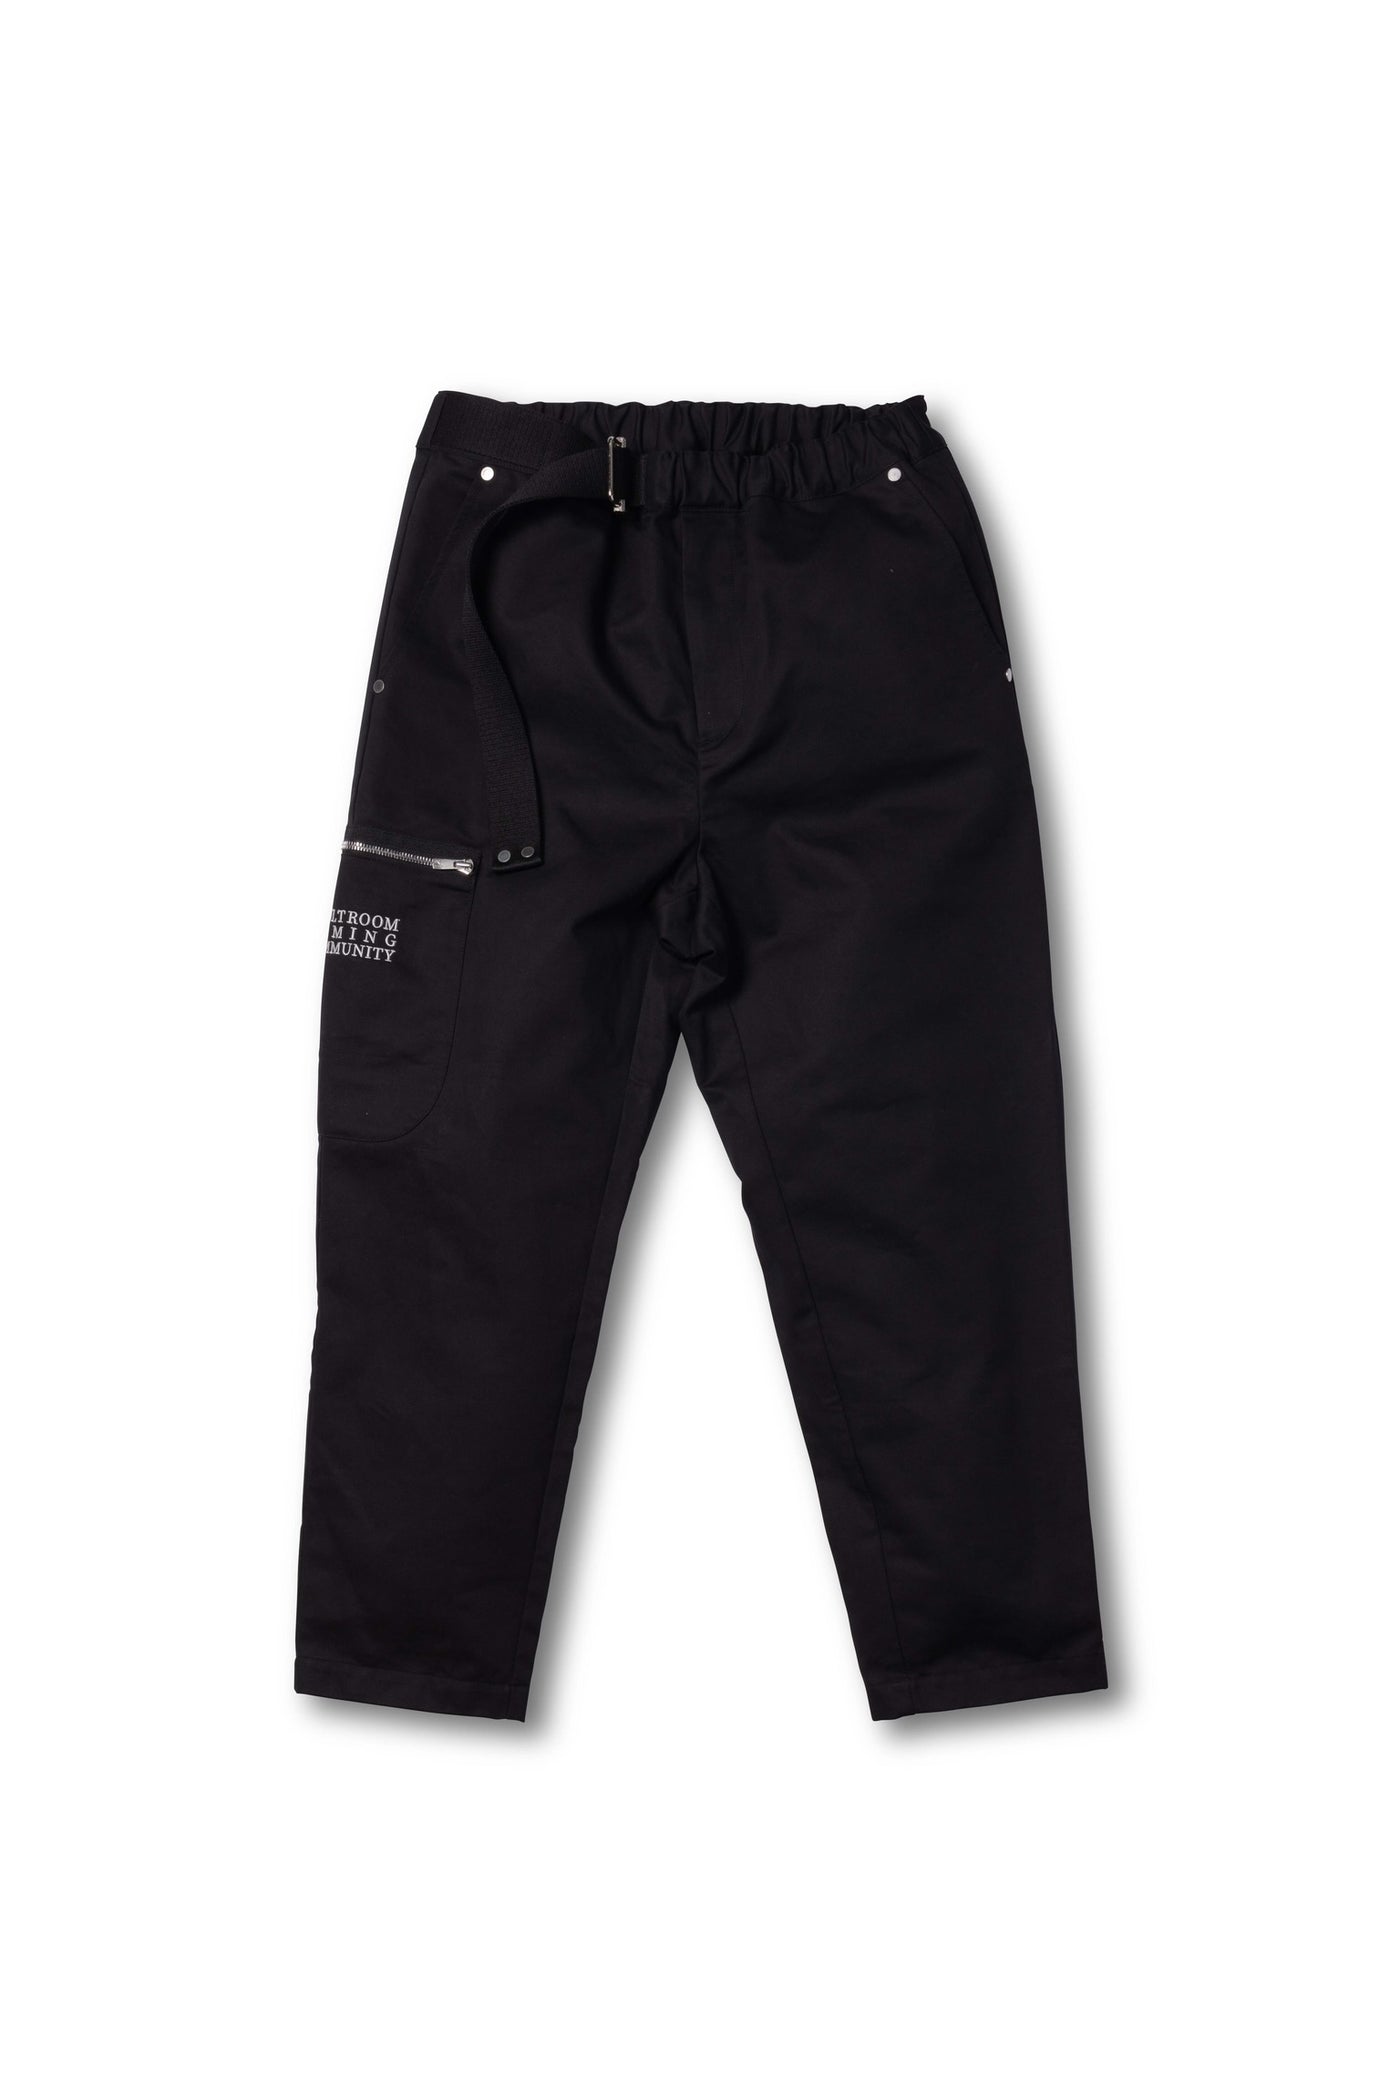 VGC CROPPED TROUSERS  Lsize新品未使用ですが